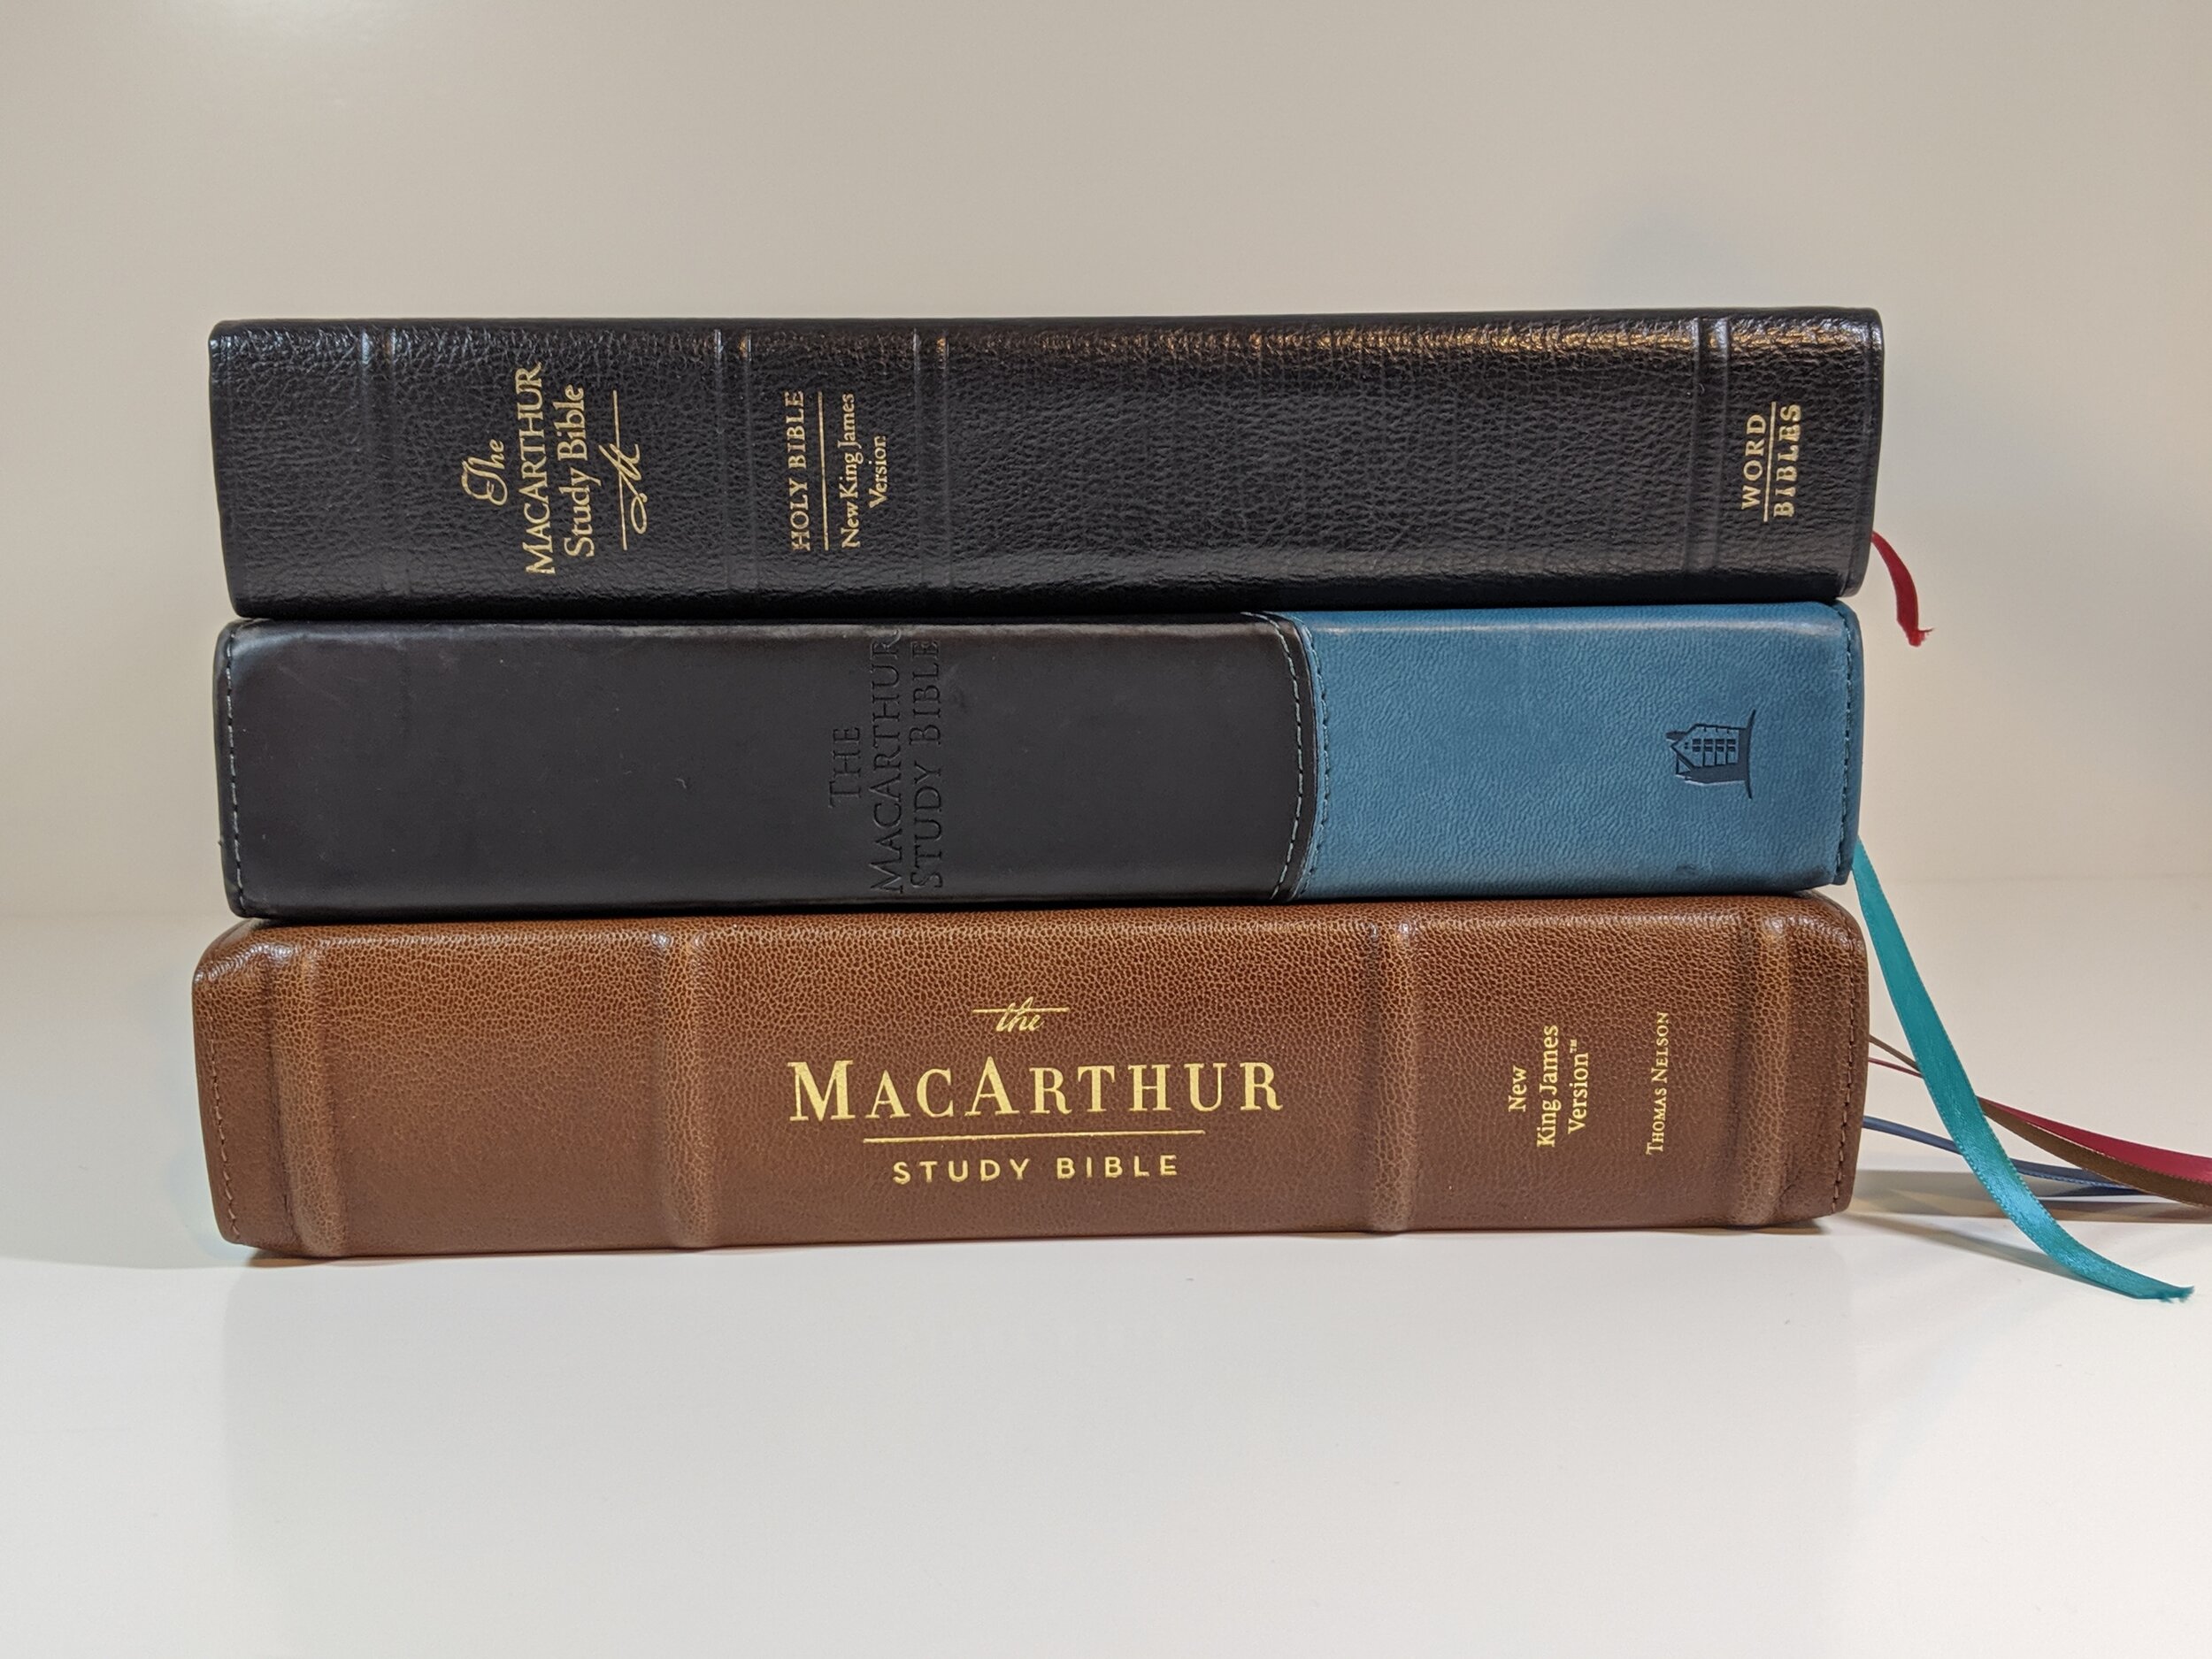  Top to Bottom: One of the first MacArthur Study Bibles from the 90’s, the first edition from Thomas Nelson, and the new Premier 2nd Edition. 